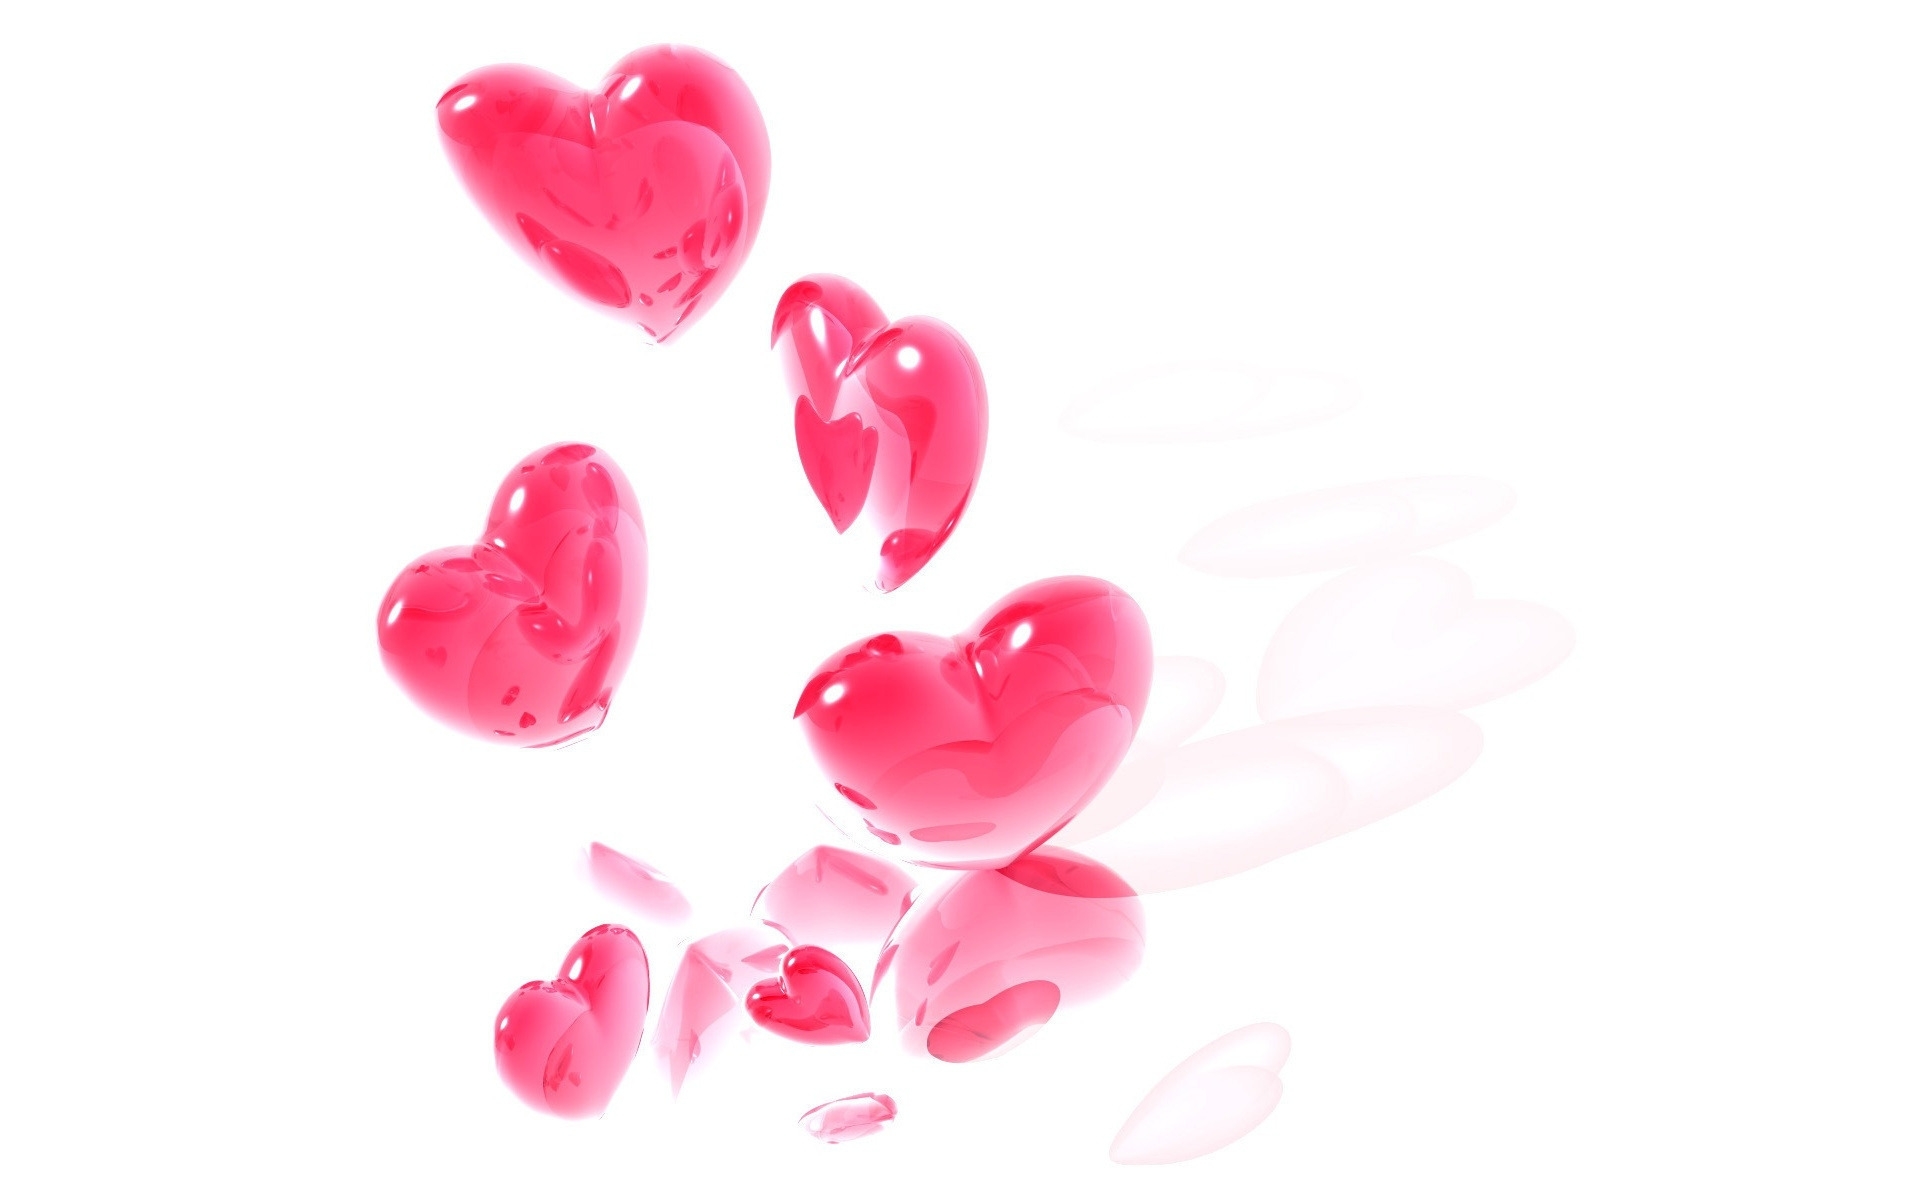 hearts, background, white